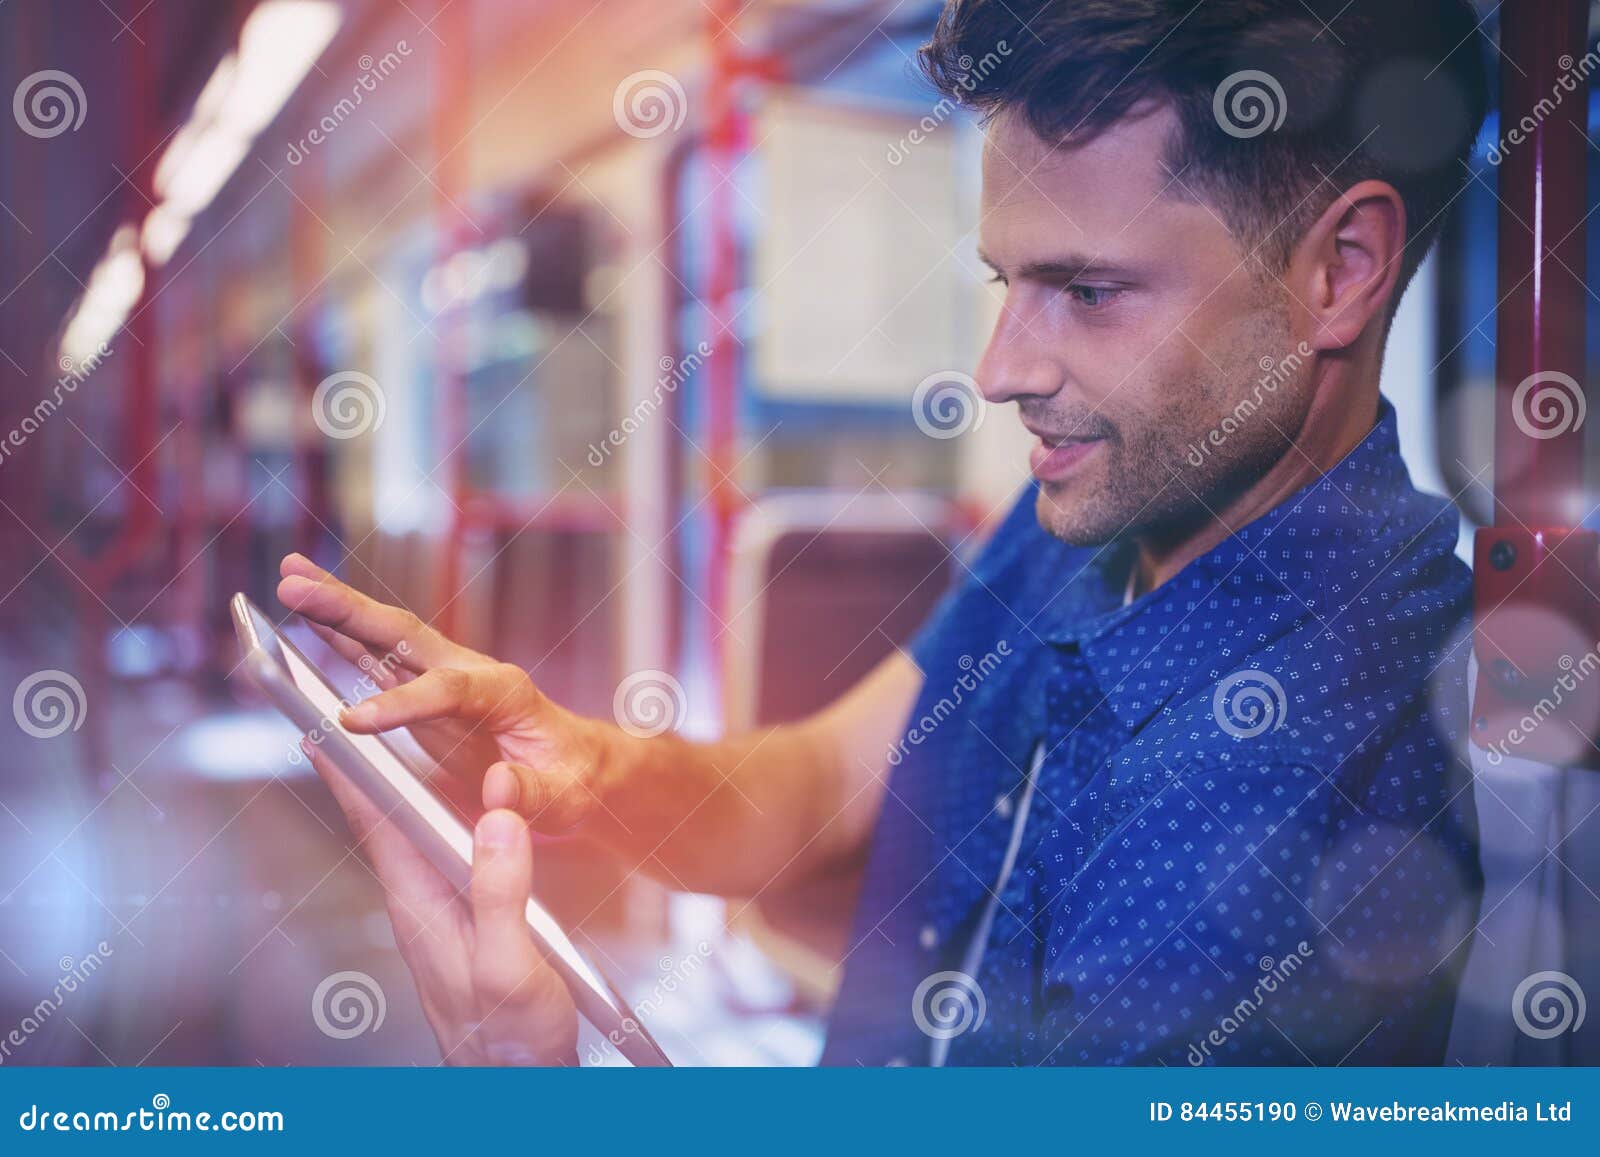 Close Up Of Handsome Man Using Digital Tablet In Train